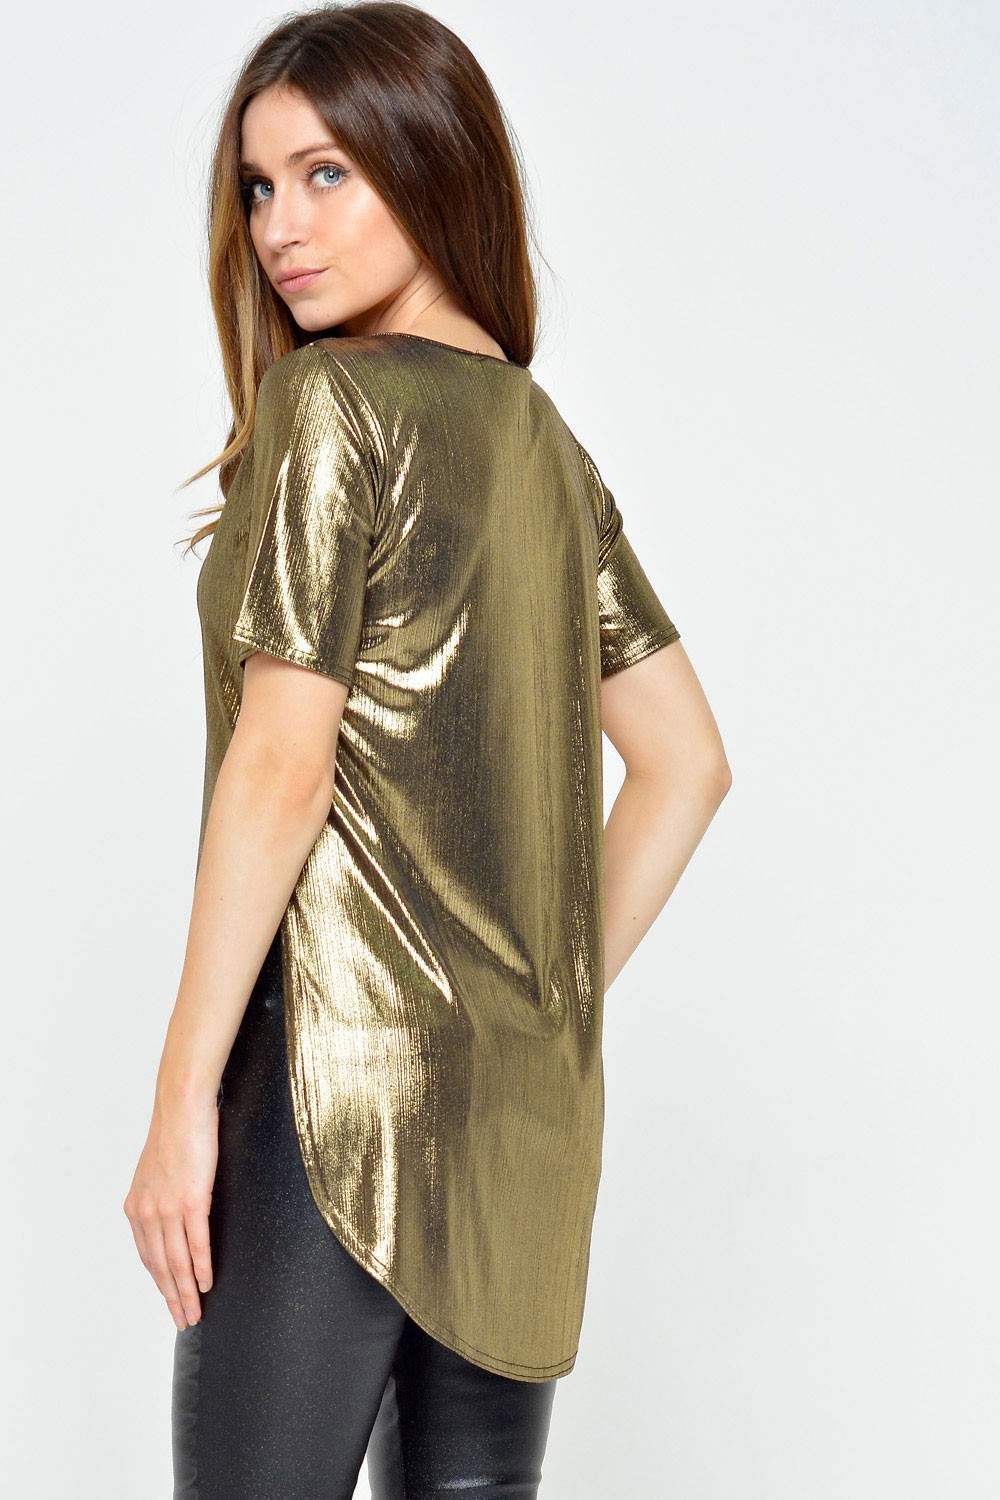 Passion Cami Metallic Top in Gold | iCLOTHING